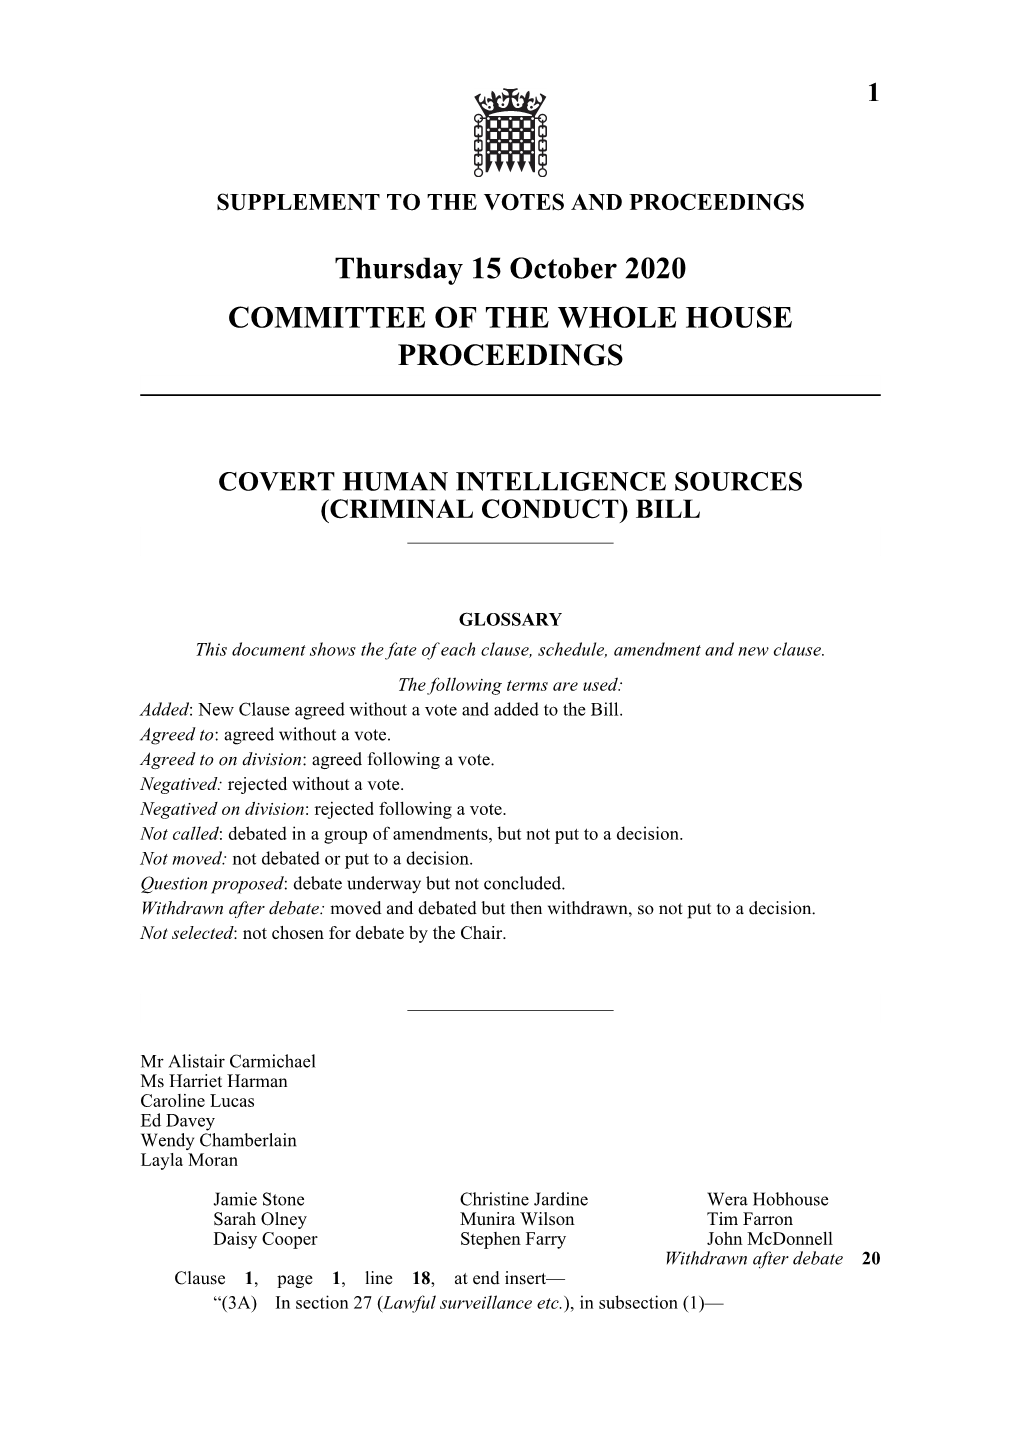 Thursday 15 October 2020 COMMITTEE of the WHOLE HOUSE PROCEEDINGS